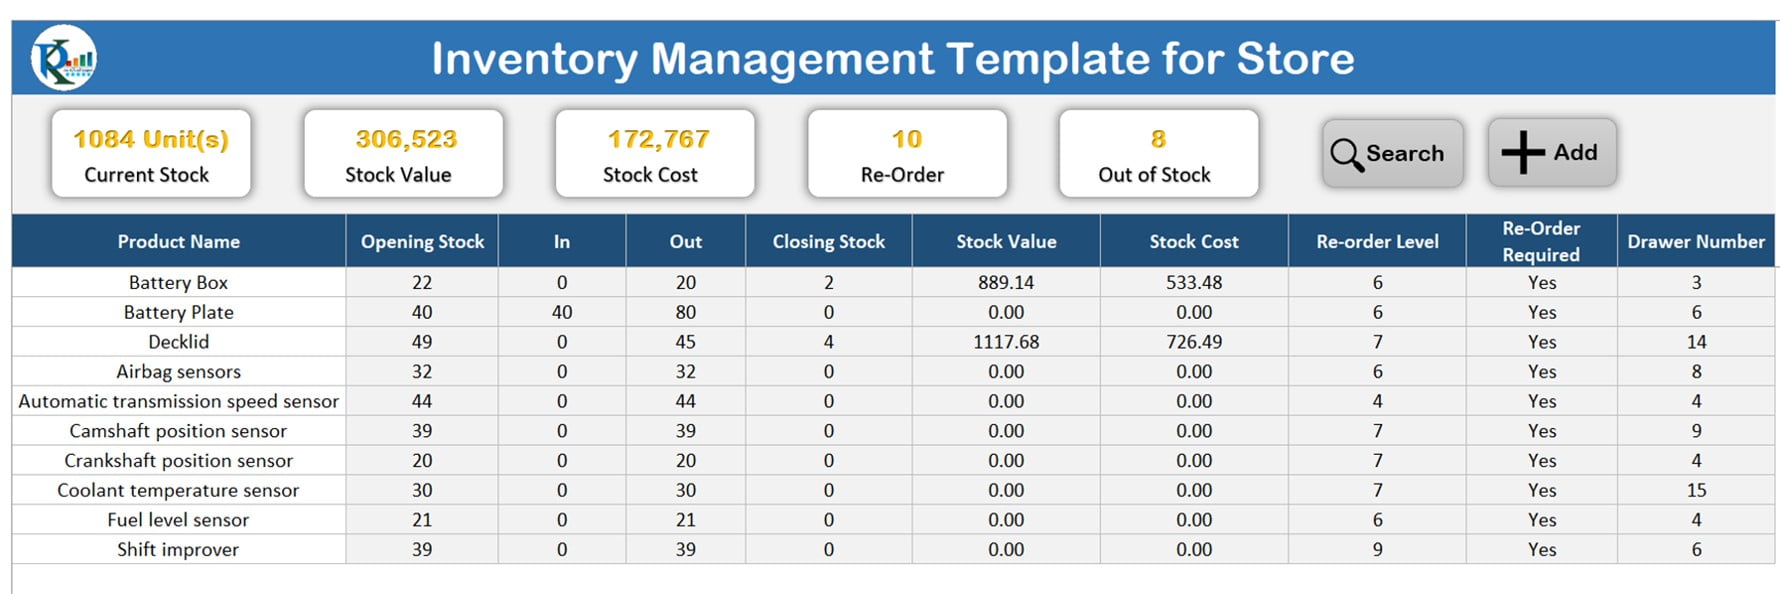 inventory-management-template-for-store-pk-an-excel-expert